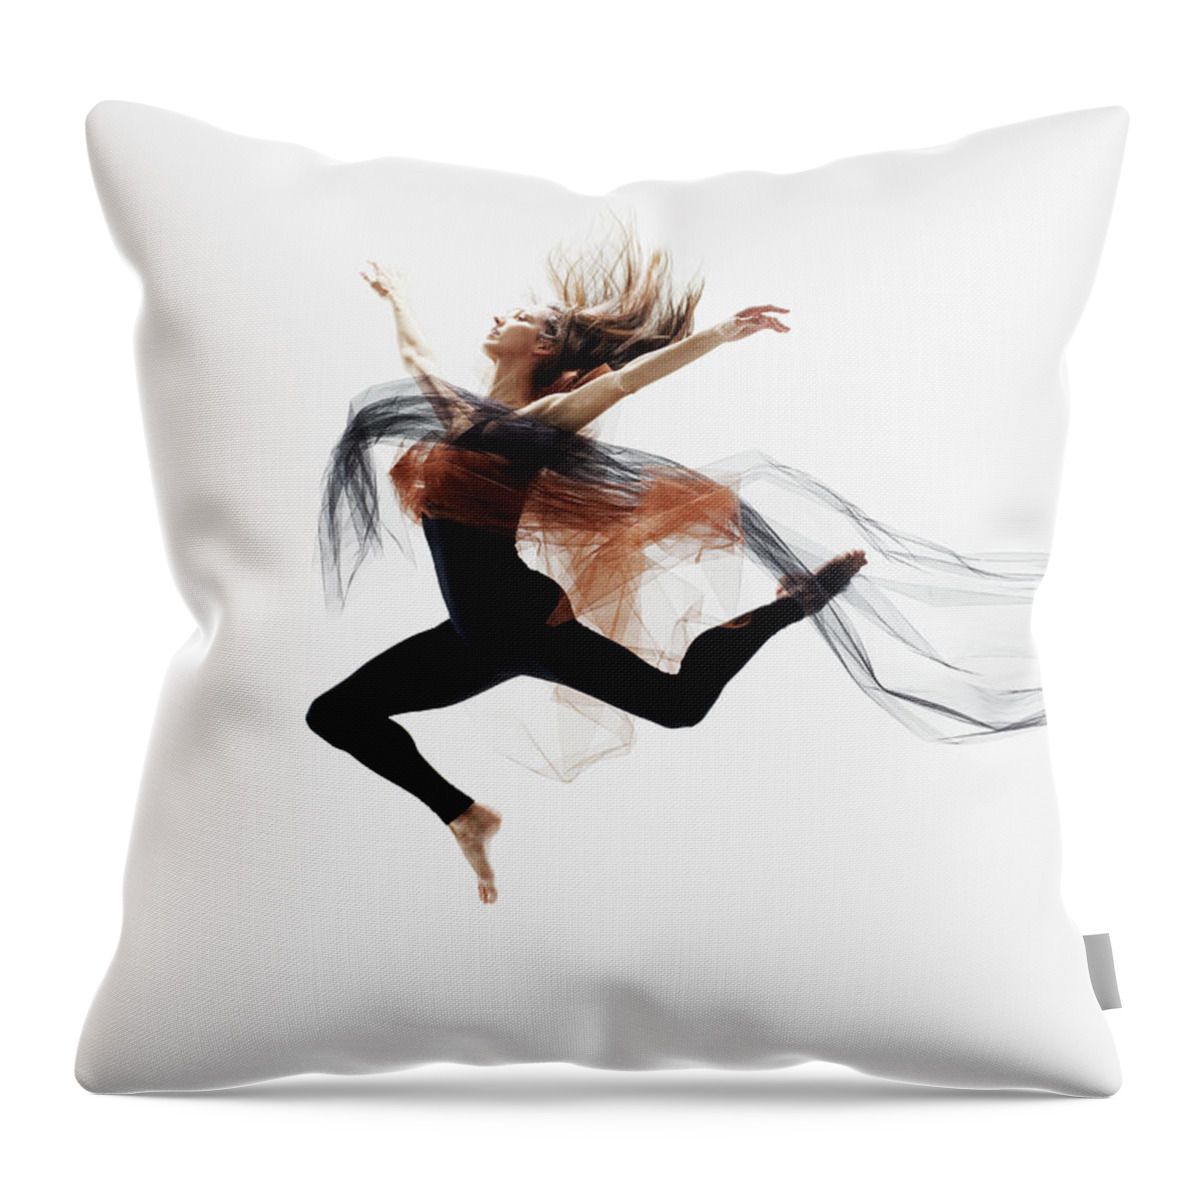 Human Arm Throw Pillow featuring the photograph Female Dancer Leaping In Mid Air by Thomas Barwick